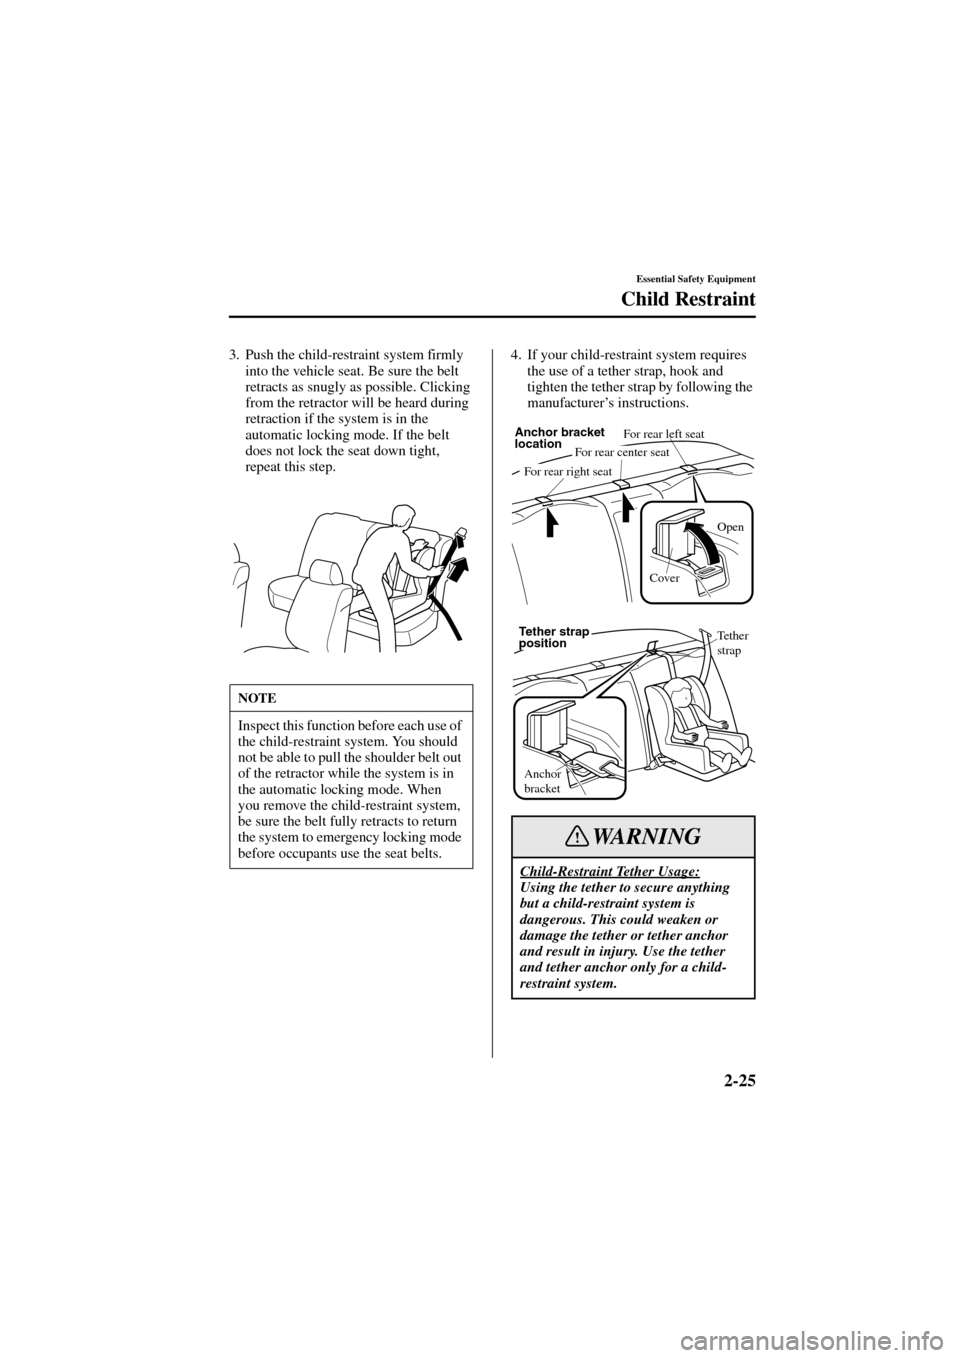 MAZDA MODEL 6 2004  Owners Manual (in English) 2-25
Essential Safety Equipment
Child Restraint
Form No. 8R29-EA-02I
3. Push the child-restraint system firmly 
into the vehicle seat. Be sure the belt 
retracts as snugly as possible. Clicking 
from 